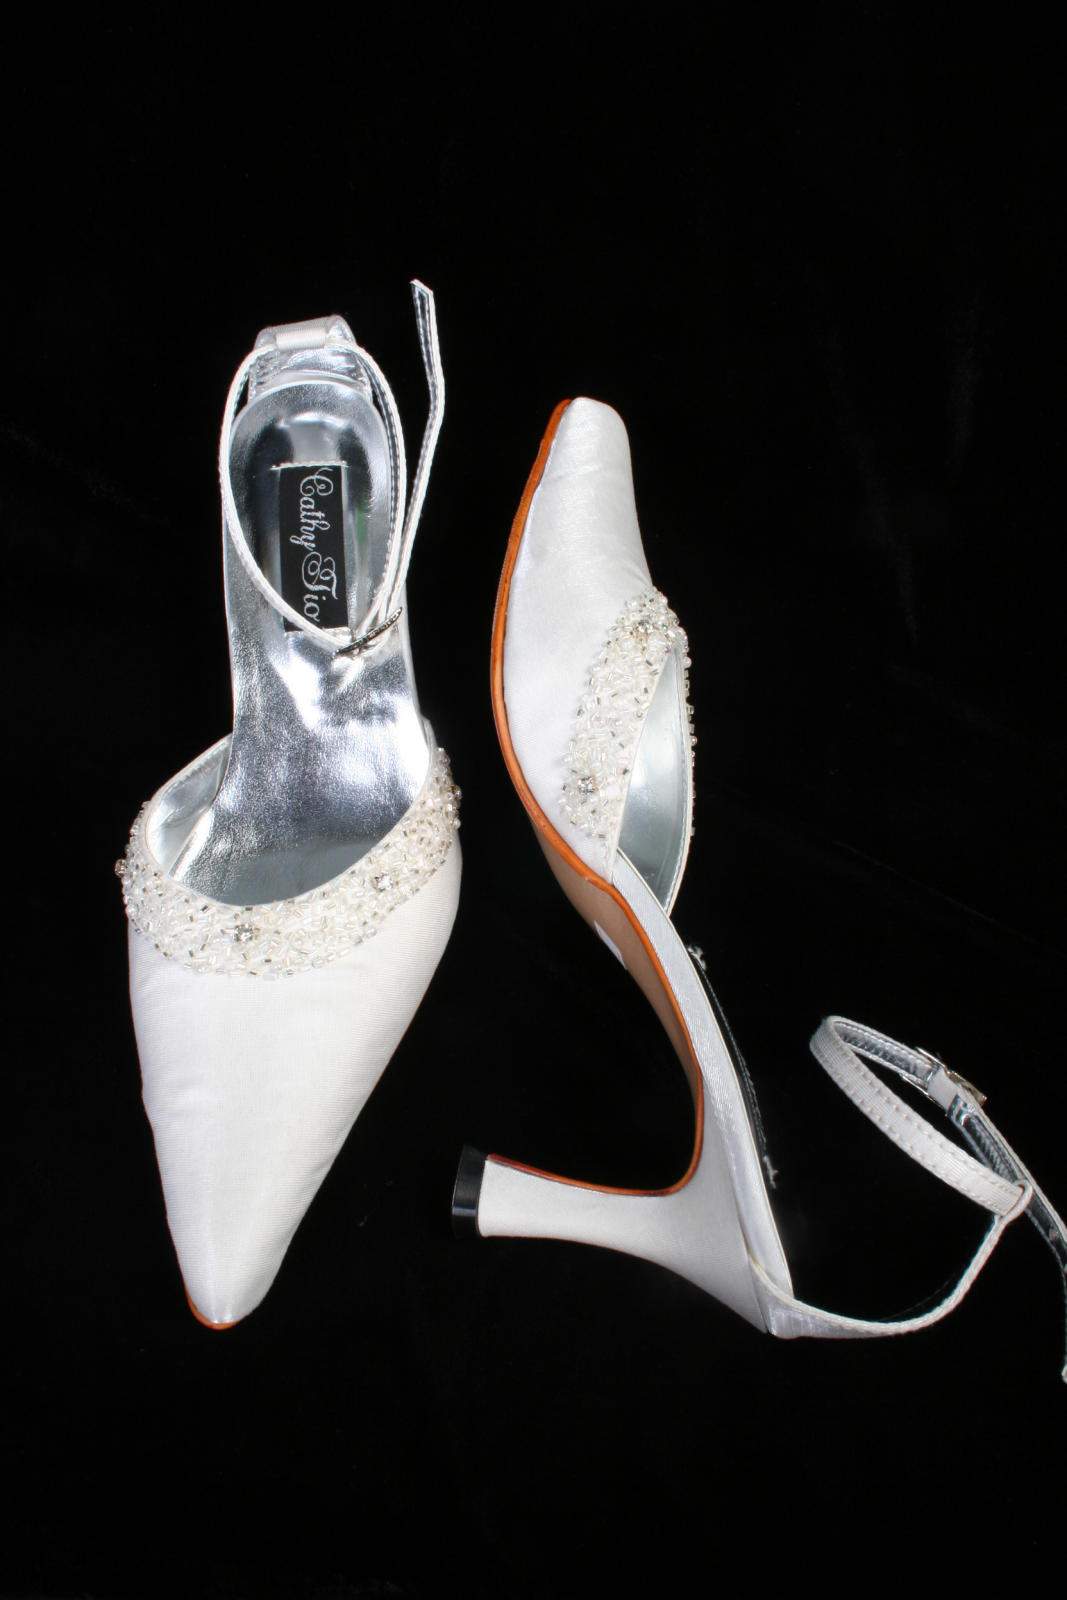 Bridal Shoes - Tips to Make the Perfect Choice! 8